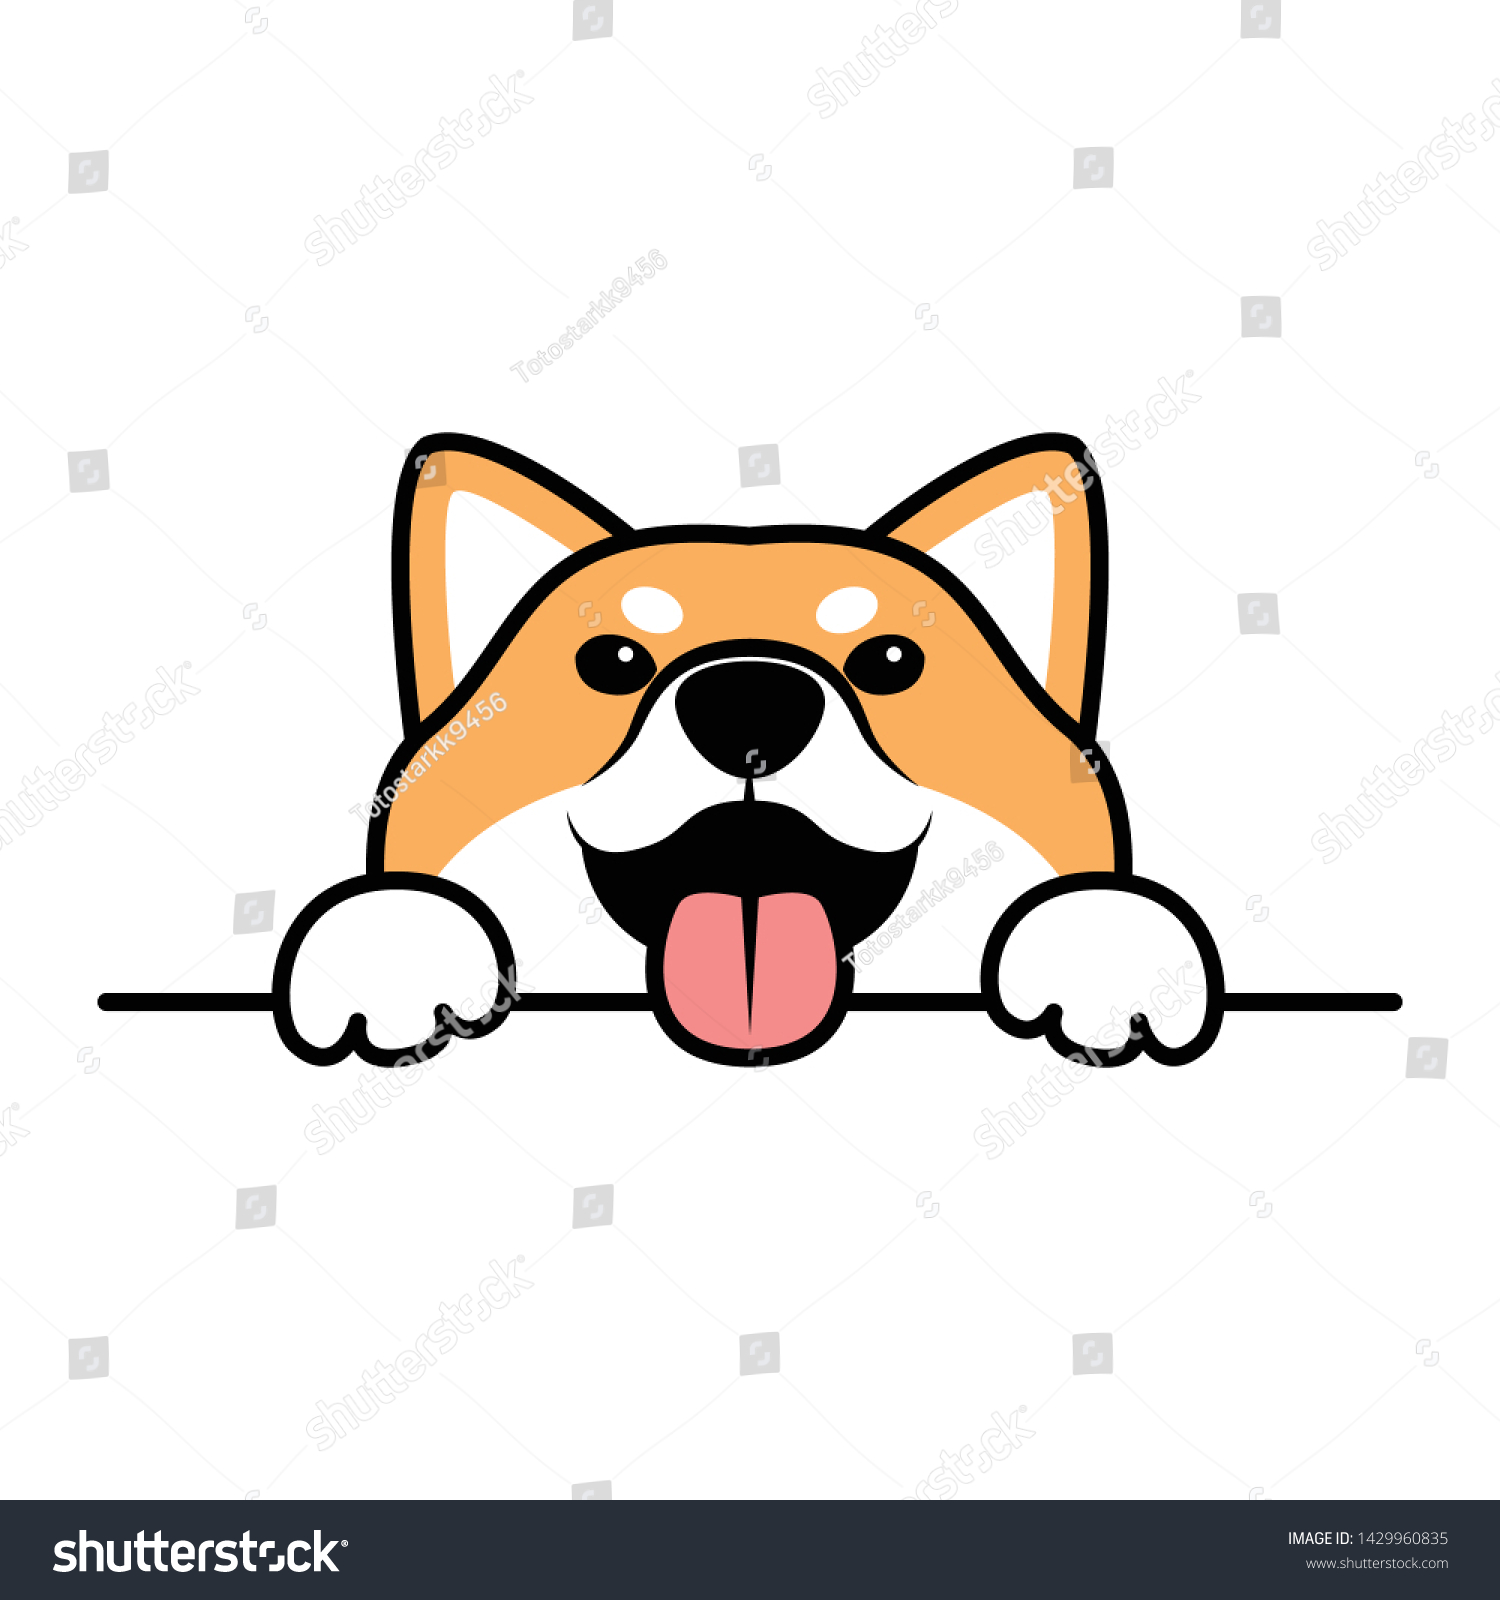 Cute Shiba Inu Dog Paws Over Stock Vector Royalty Free